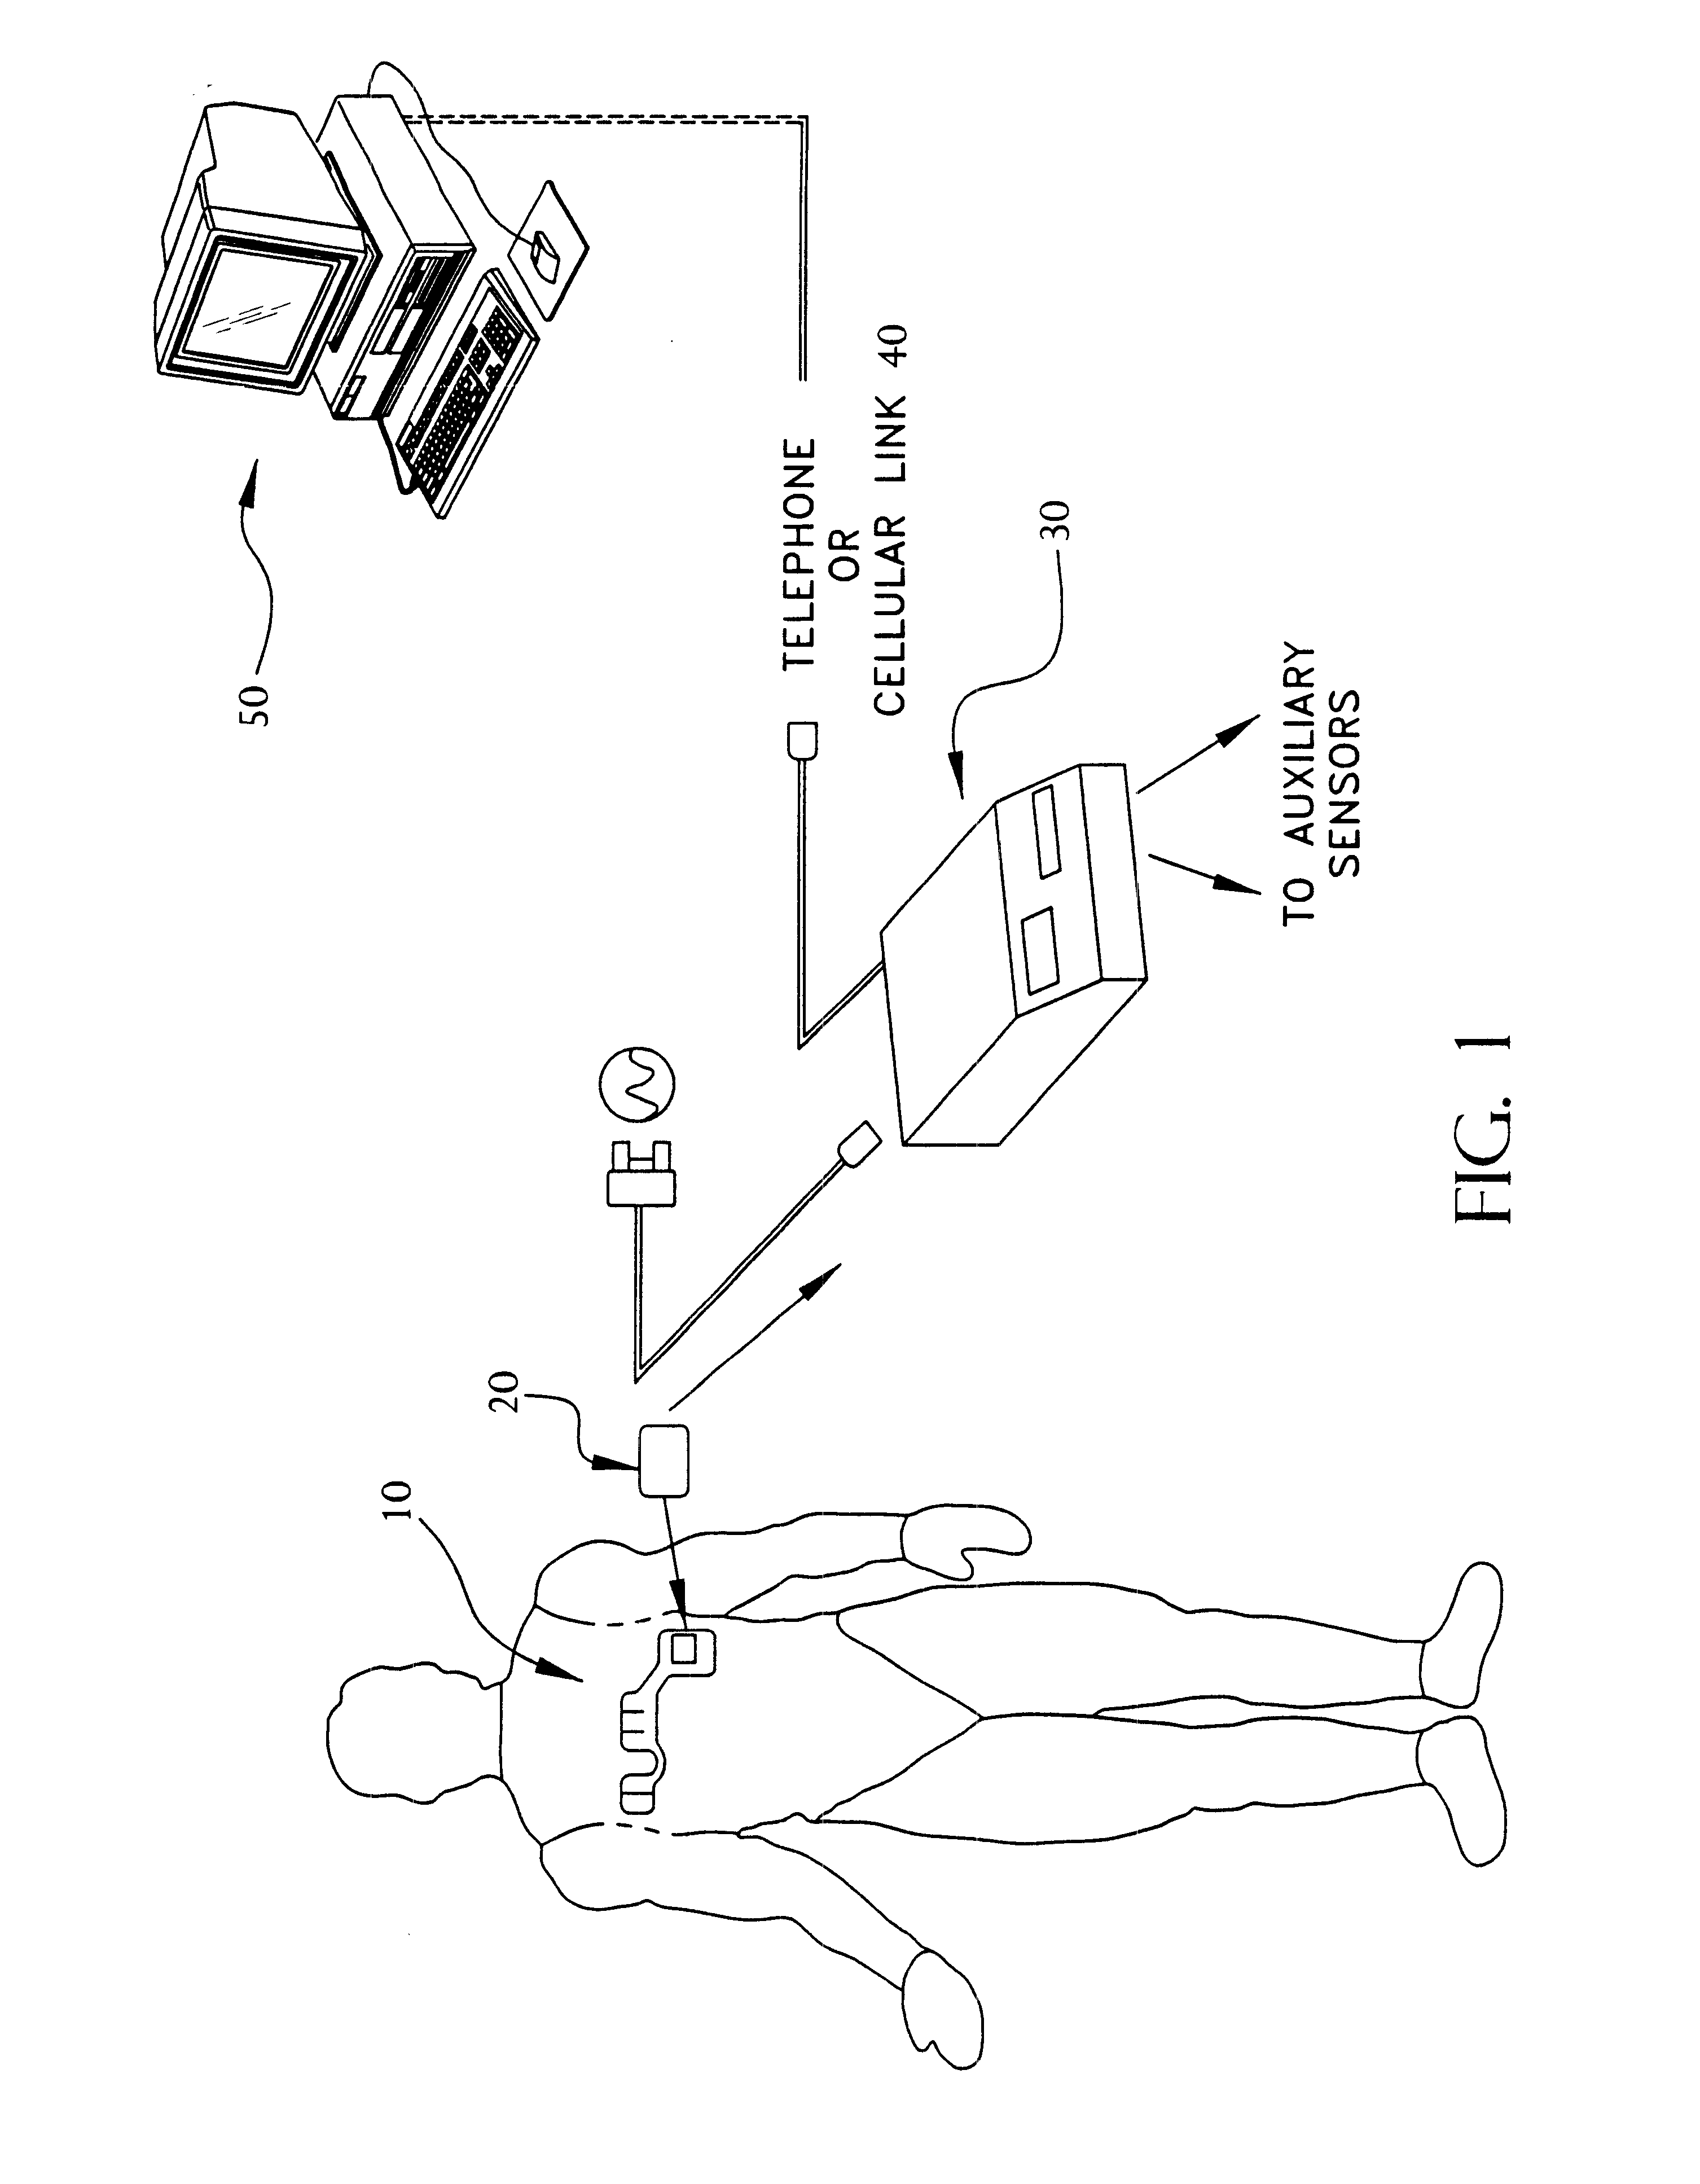 Portable remote patient telemonitoring system using a memory card or smart card